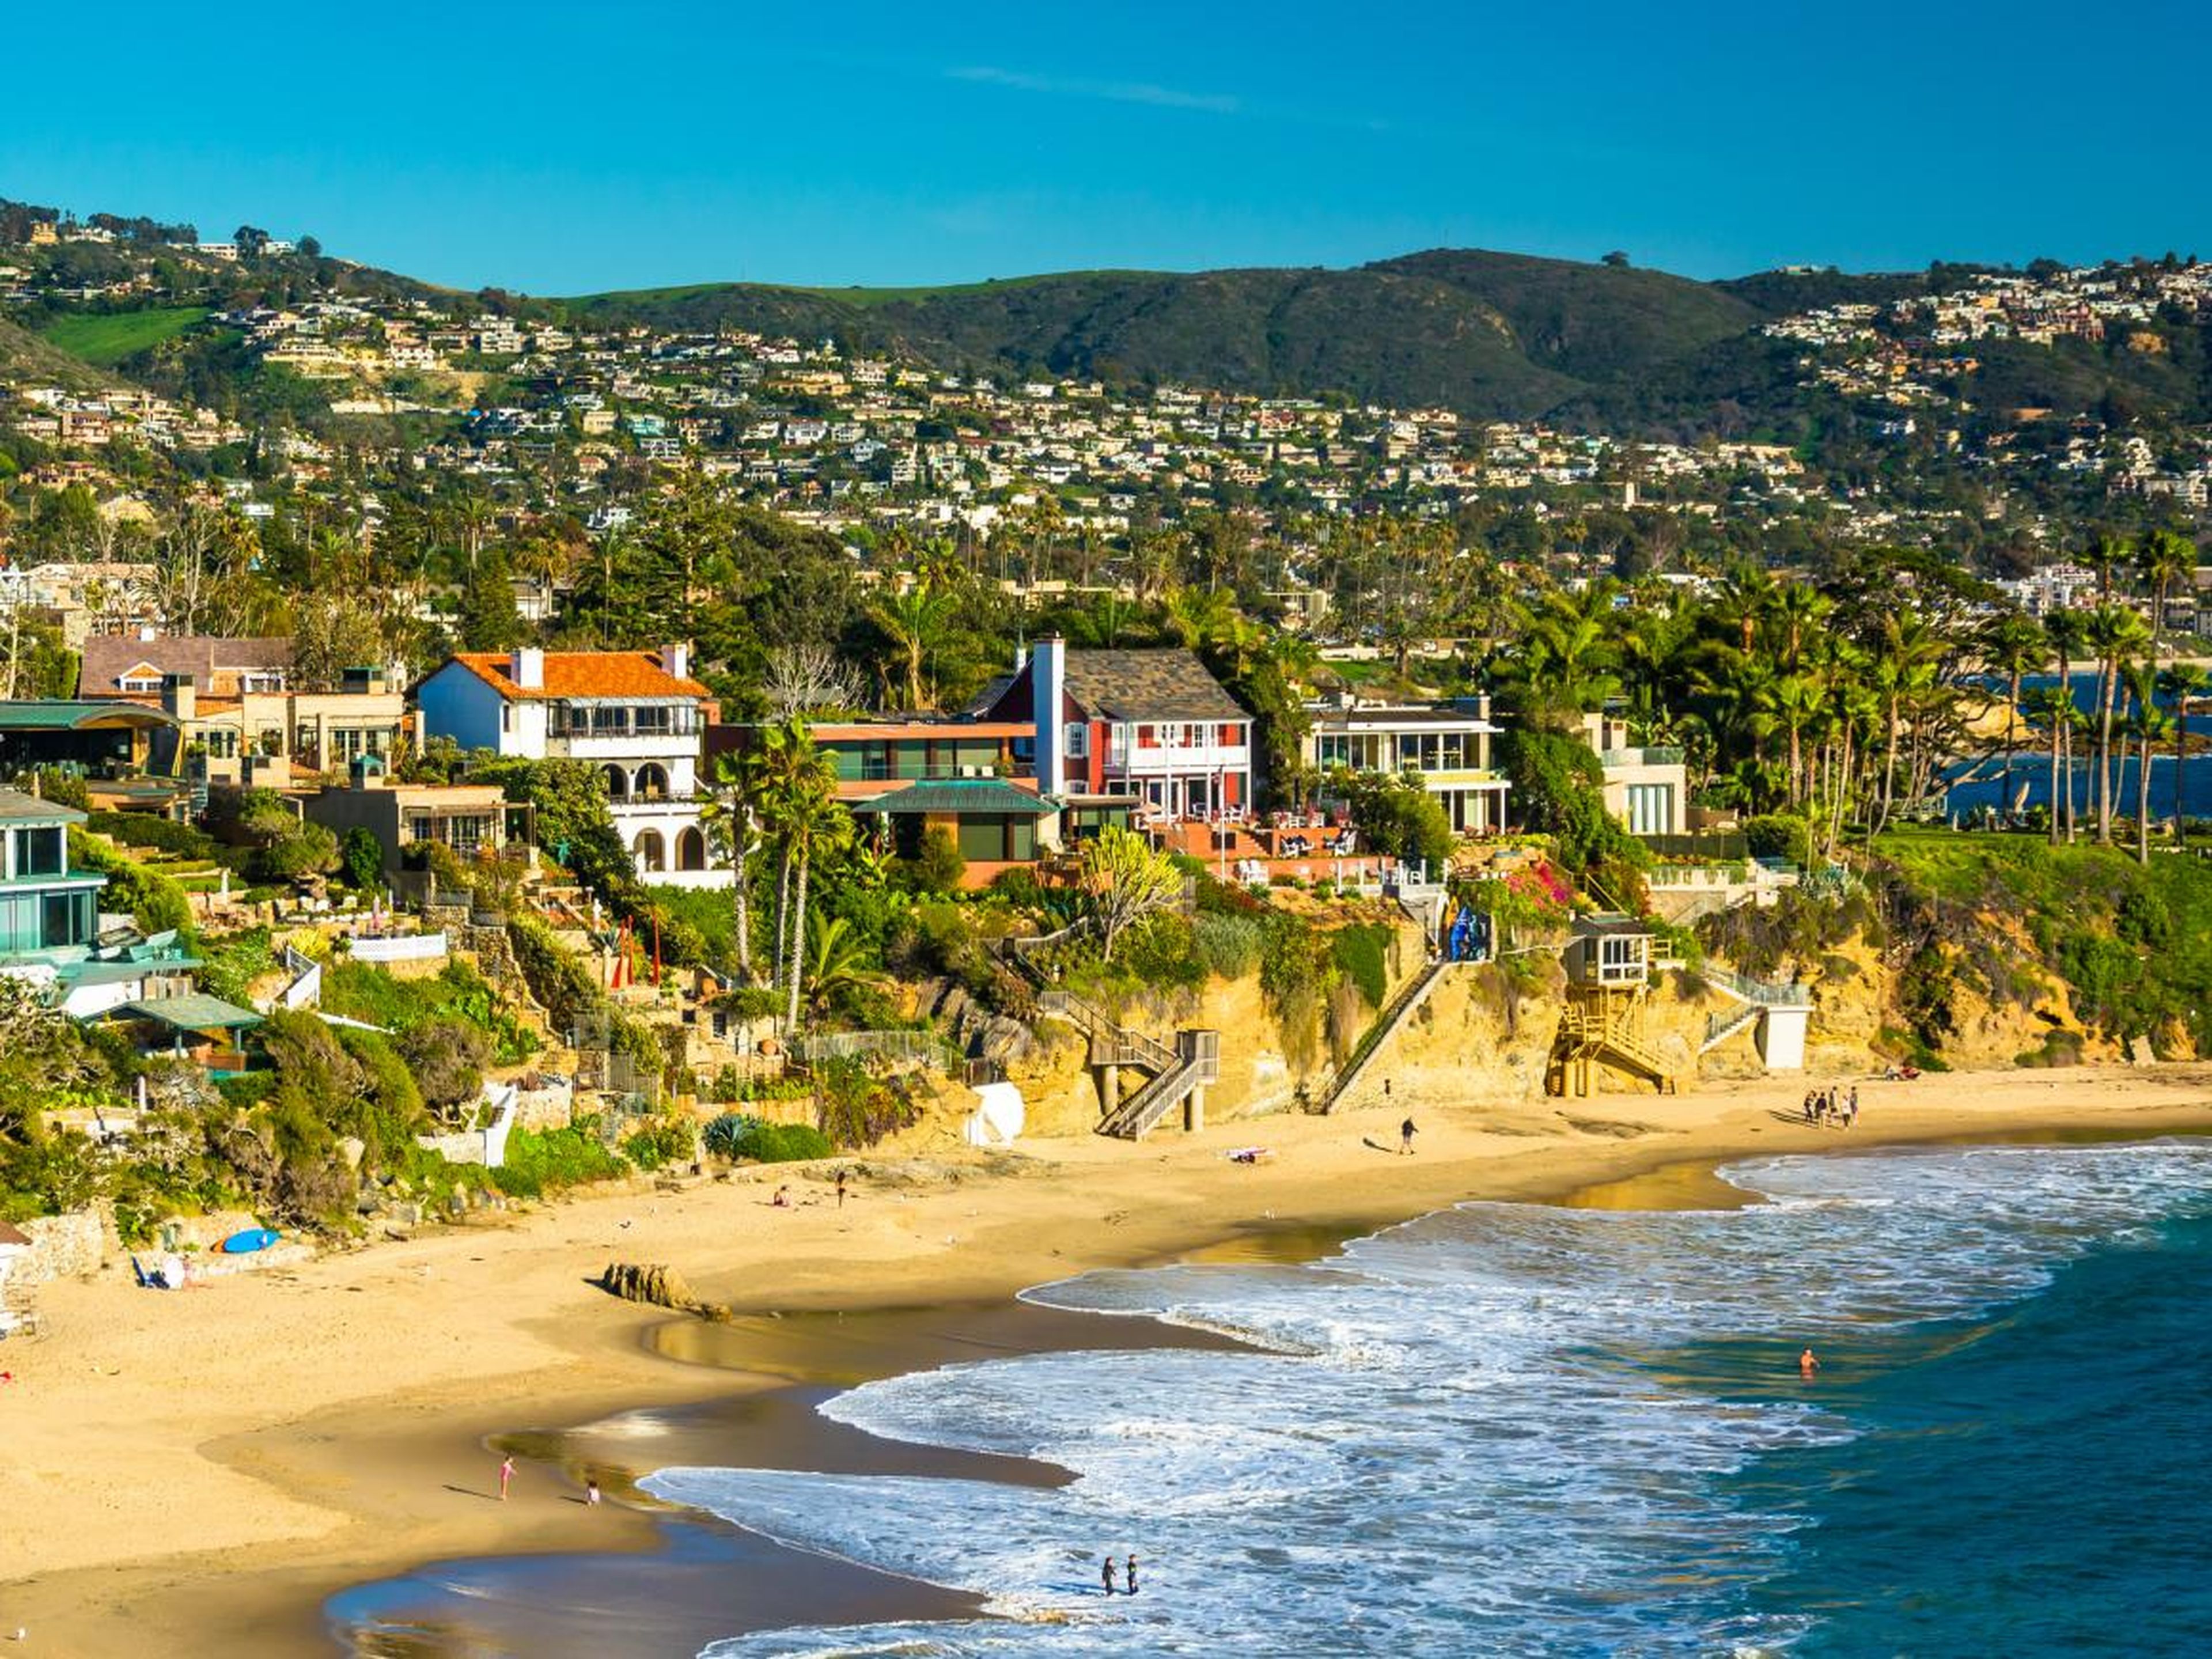 In 1971, Buffett purchased a vacation home in Laguna Beach, California, for $150,000 — it's currently listed for sale for $7.9 million.